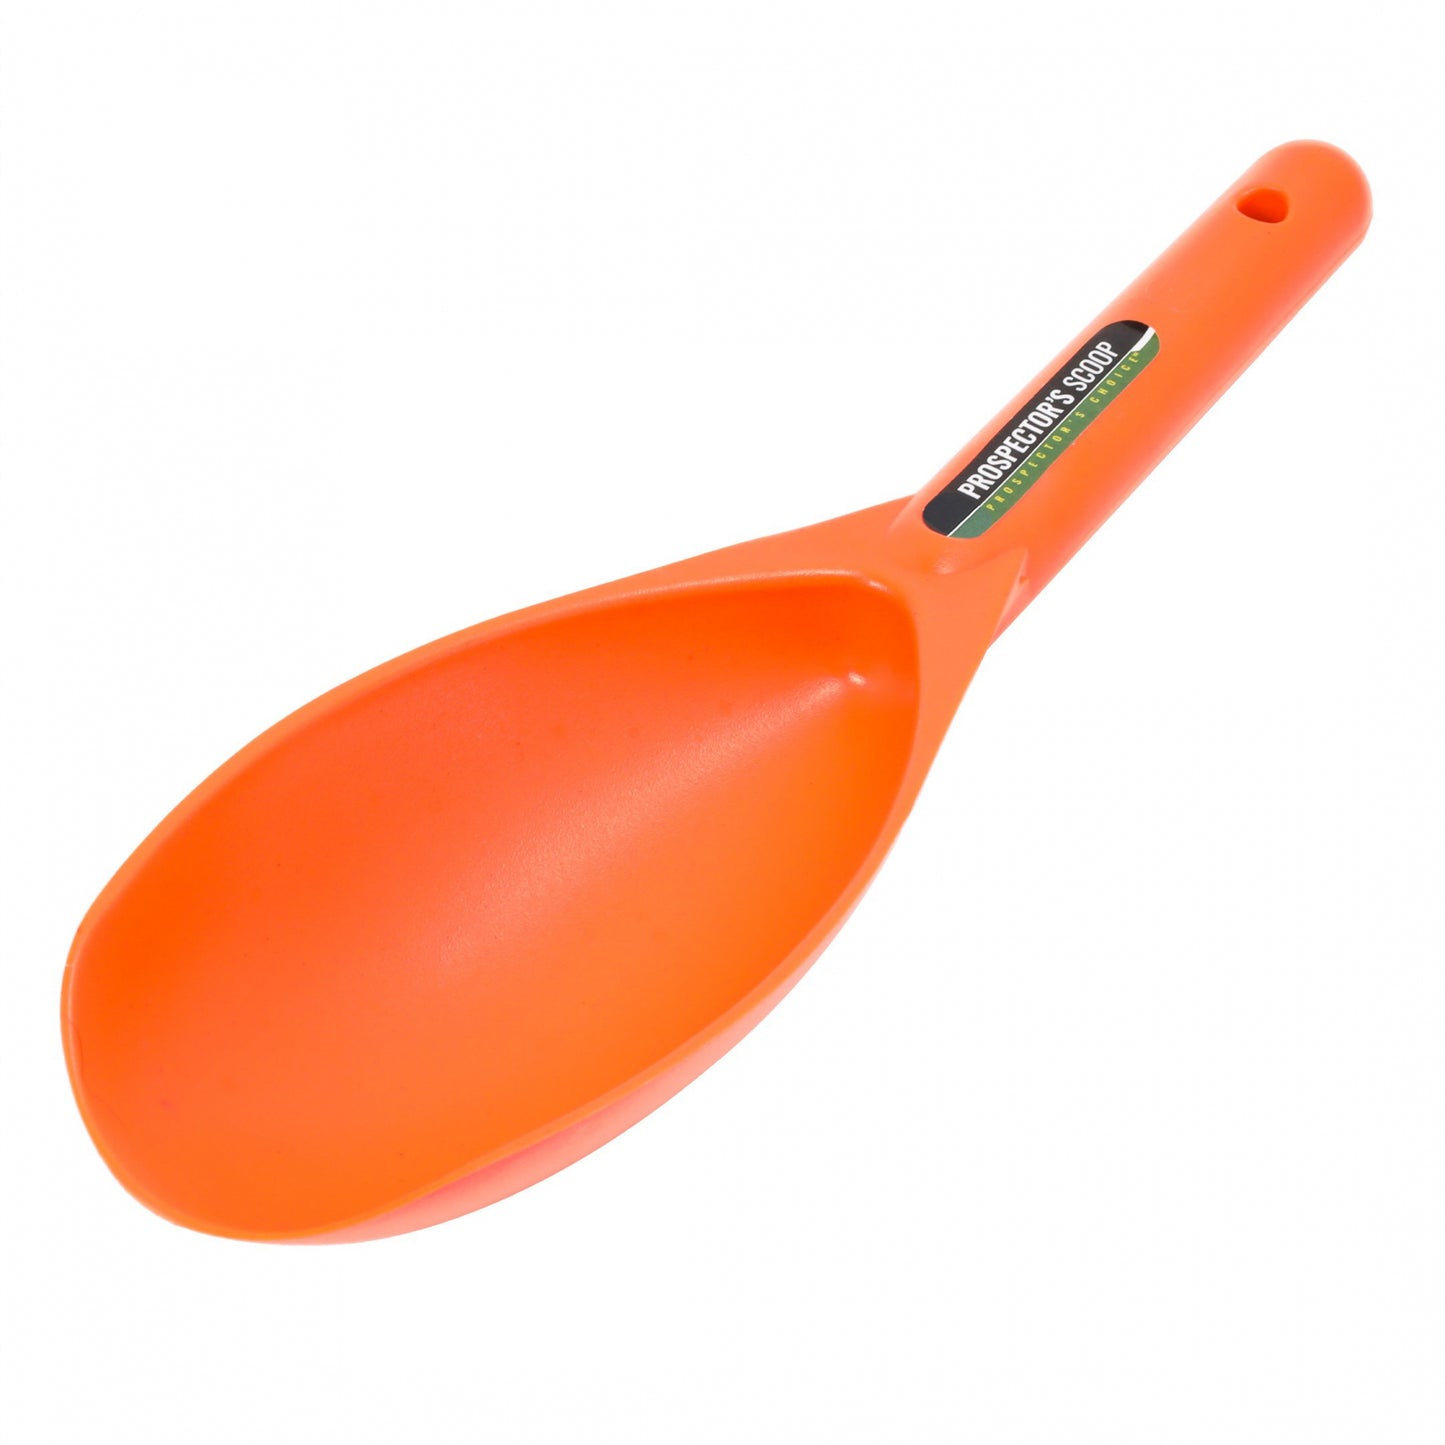 12.5 Inch Traditional Gold Panning Prospector's Sand Scoop Trowel (4 Colors)